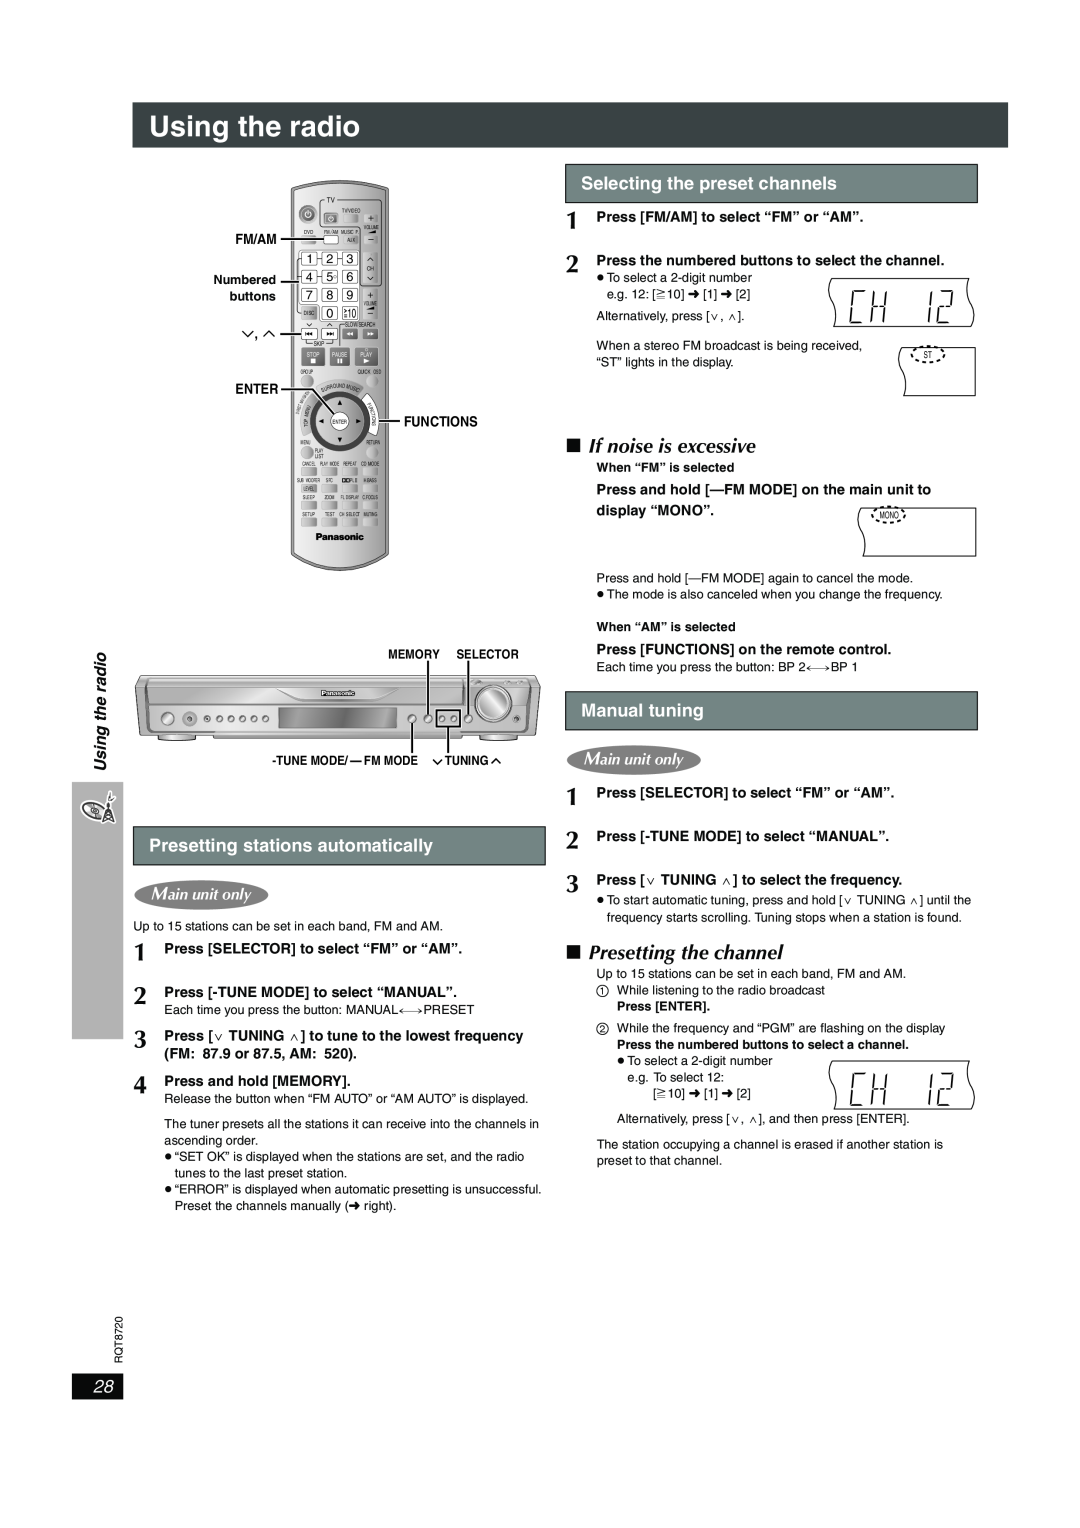 Panasonic SC-HT744 Using the radio, If noise is excessive, Presetting the channel, Presetting stations automatically 